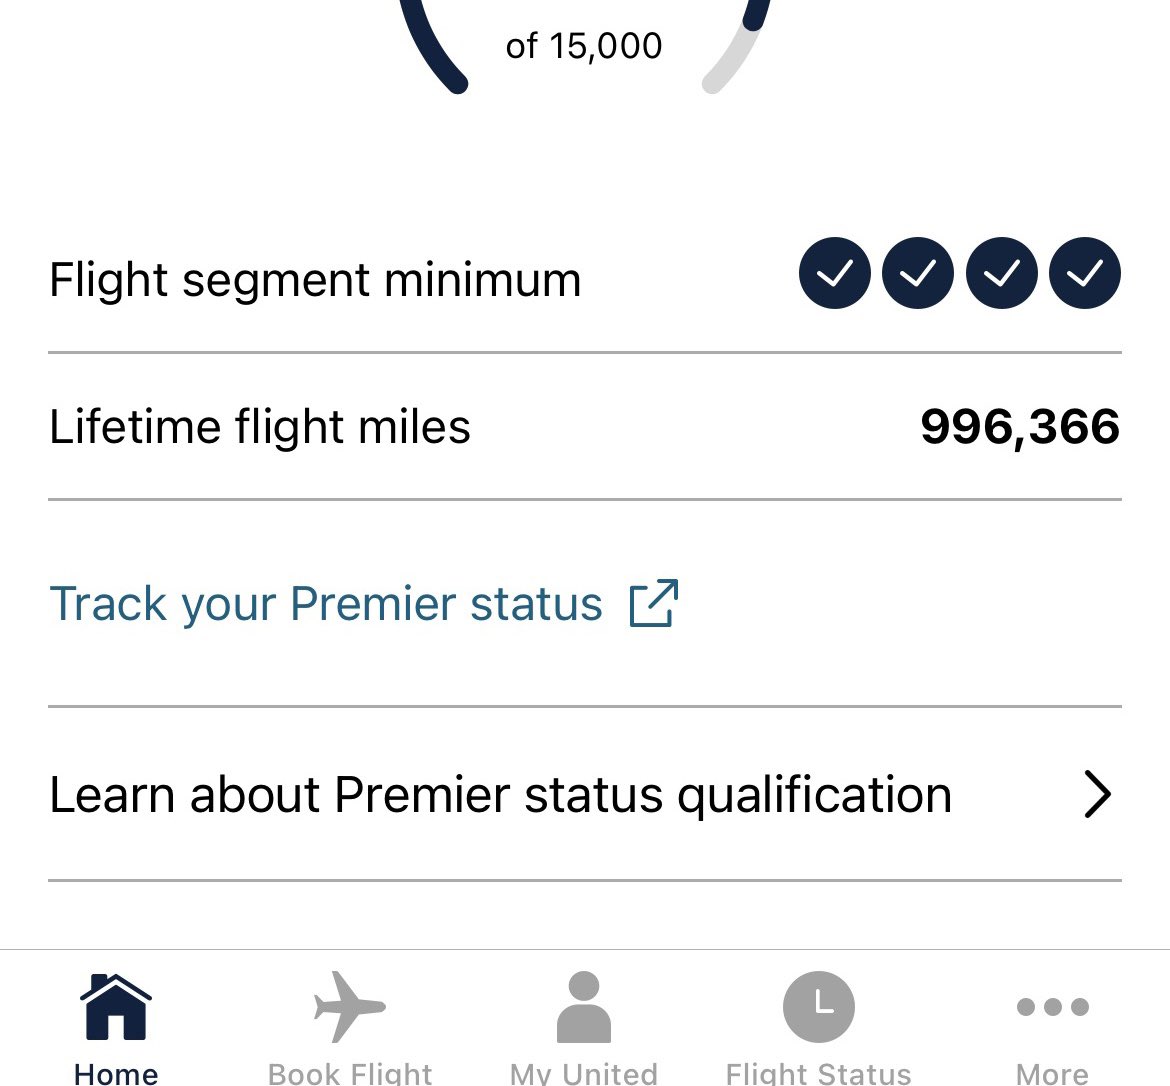 All checked in for tomorrow’s milestone flight for me! Couldn’t think of a better way to cross it than London to San Francisco in Polaris! @united #Heathrow #SanFrancisco #millionmiler #mileageplus #united #polaris #LHR #SFO